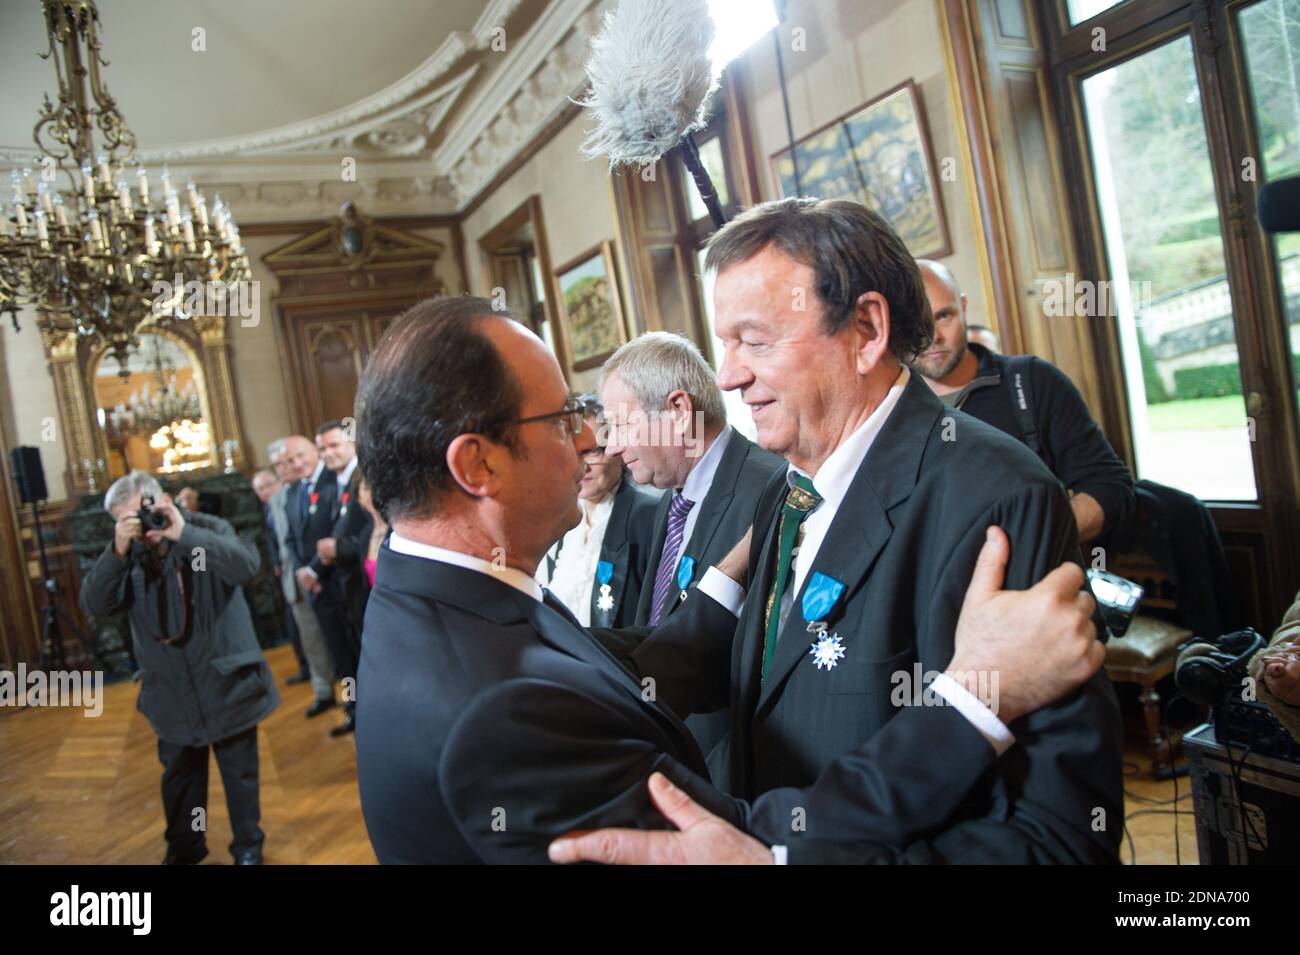 French President Francois Hollande holds a medal of Legion of Honor to Marc  Boisseuil, Jean-Claude Boisdevesy, Pierre Mamers, Edith Perrier, Jean-Claude  Talbert, Michelle Laurent-Bruzy, Patricia Broussole, Jean-Louis Chassaing,  Fredy Dumas, during an